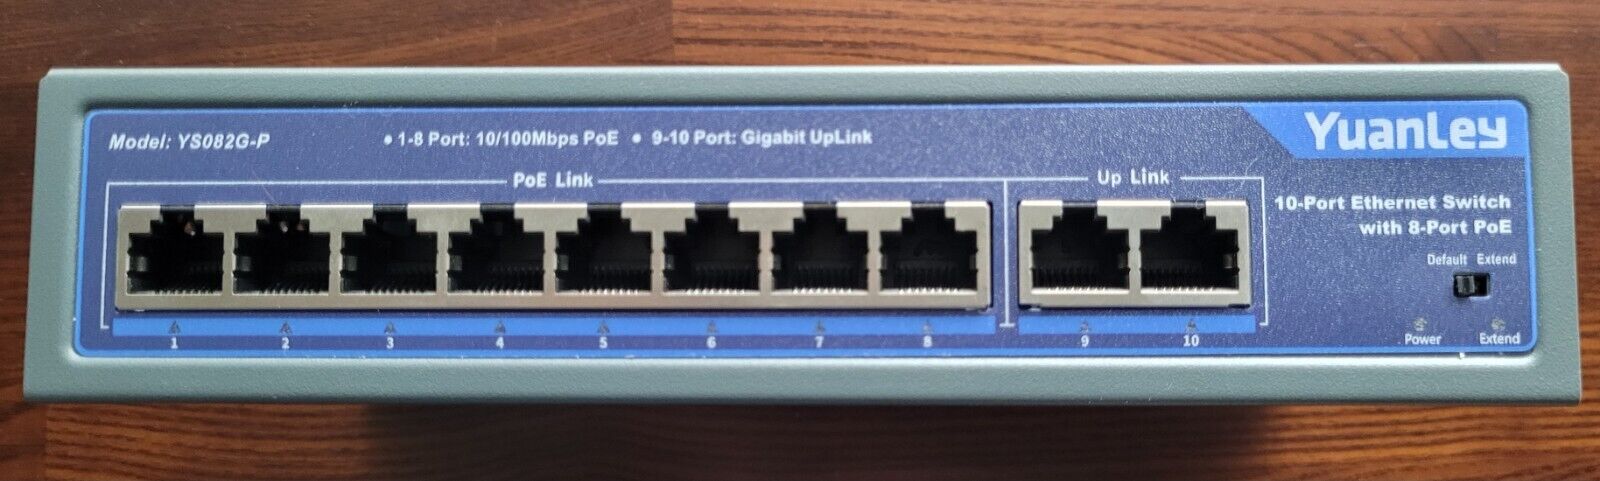 YuanLey 10 Port PoE Switch With 8 Poe Unmanaged with 2 1000Mbps Uplink